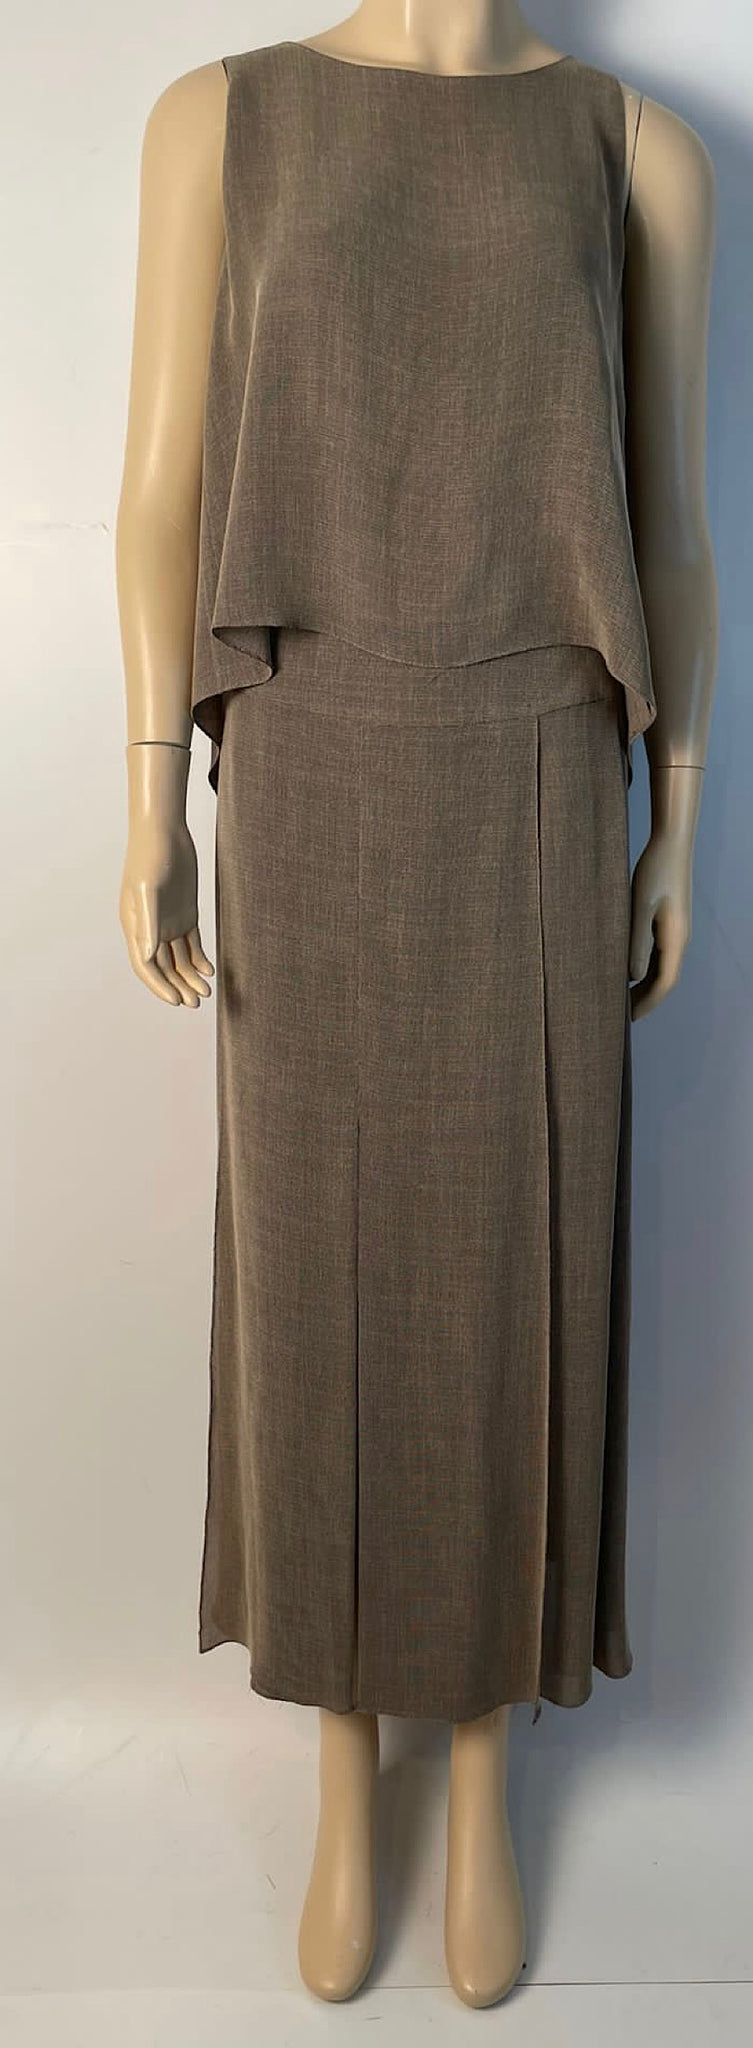 Chanel Vintage 99P 1999 Spring brown blouse long maxi skirt dress outf –  HelensChanel